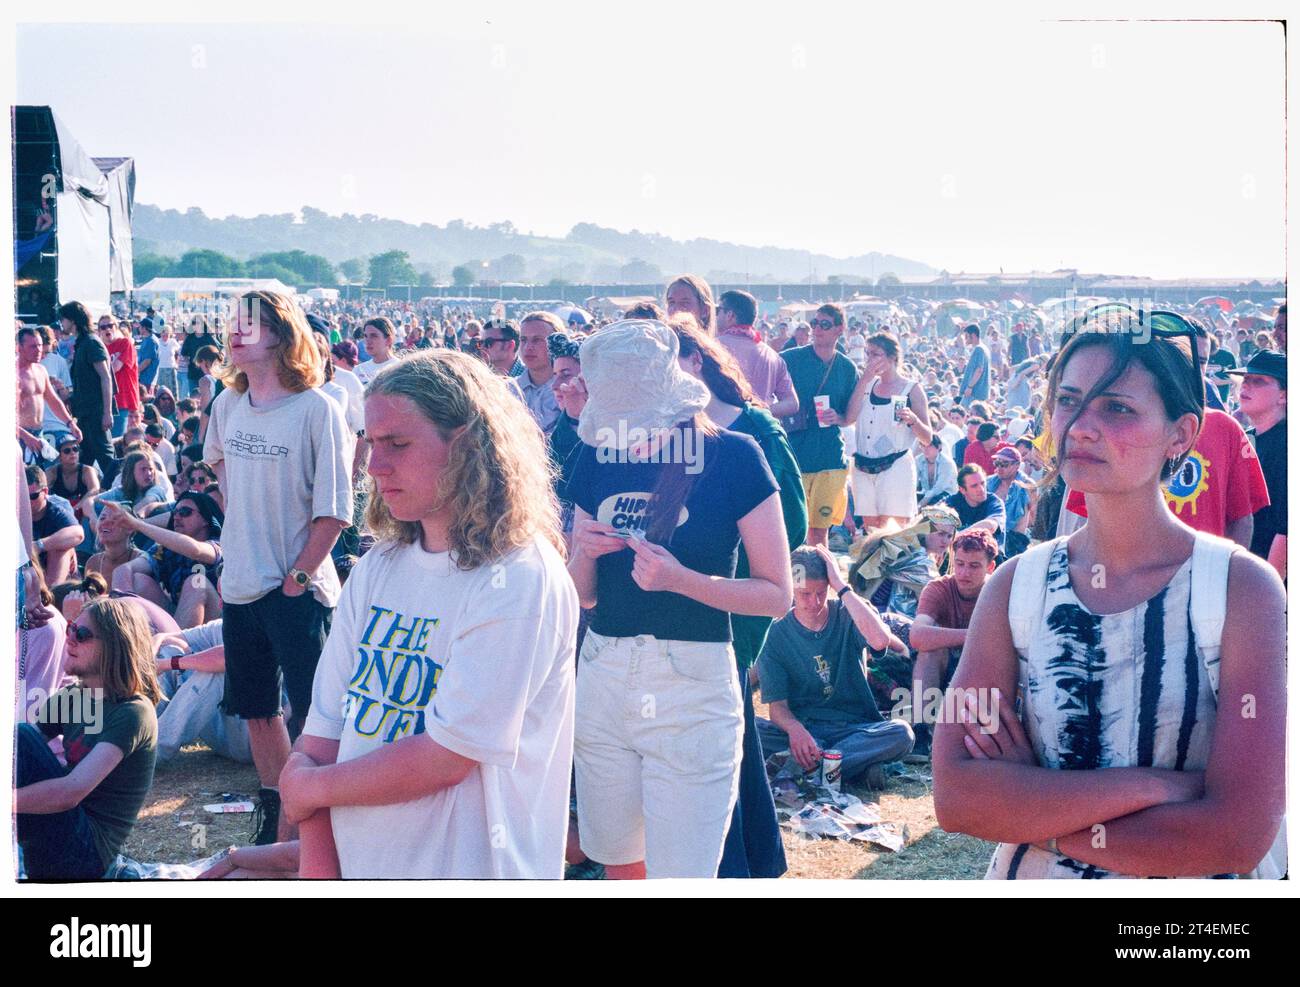 GLASTONBURY FESTIVAL, 1995: The second NME Stage field and crowd at the Glastonbury Festival, Pilton Farm, Somerset, England, 24 June 1995. In 1995 the festival celebrated its 25th anniversary. There was no pyramid stage that year as it had burned down. Photo: ROB WATKINS Stock Photo